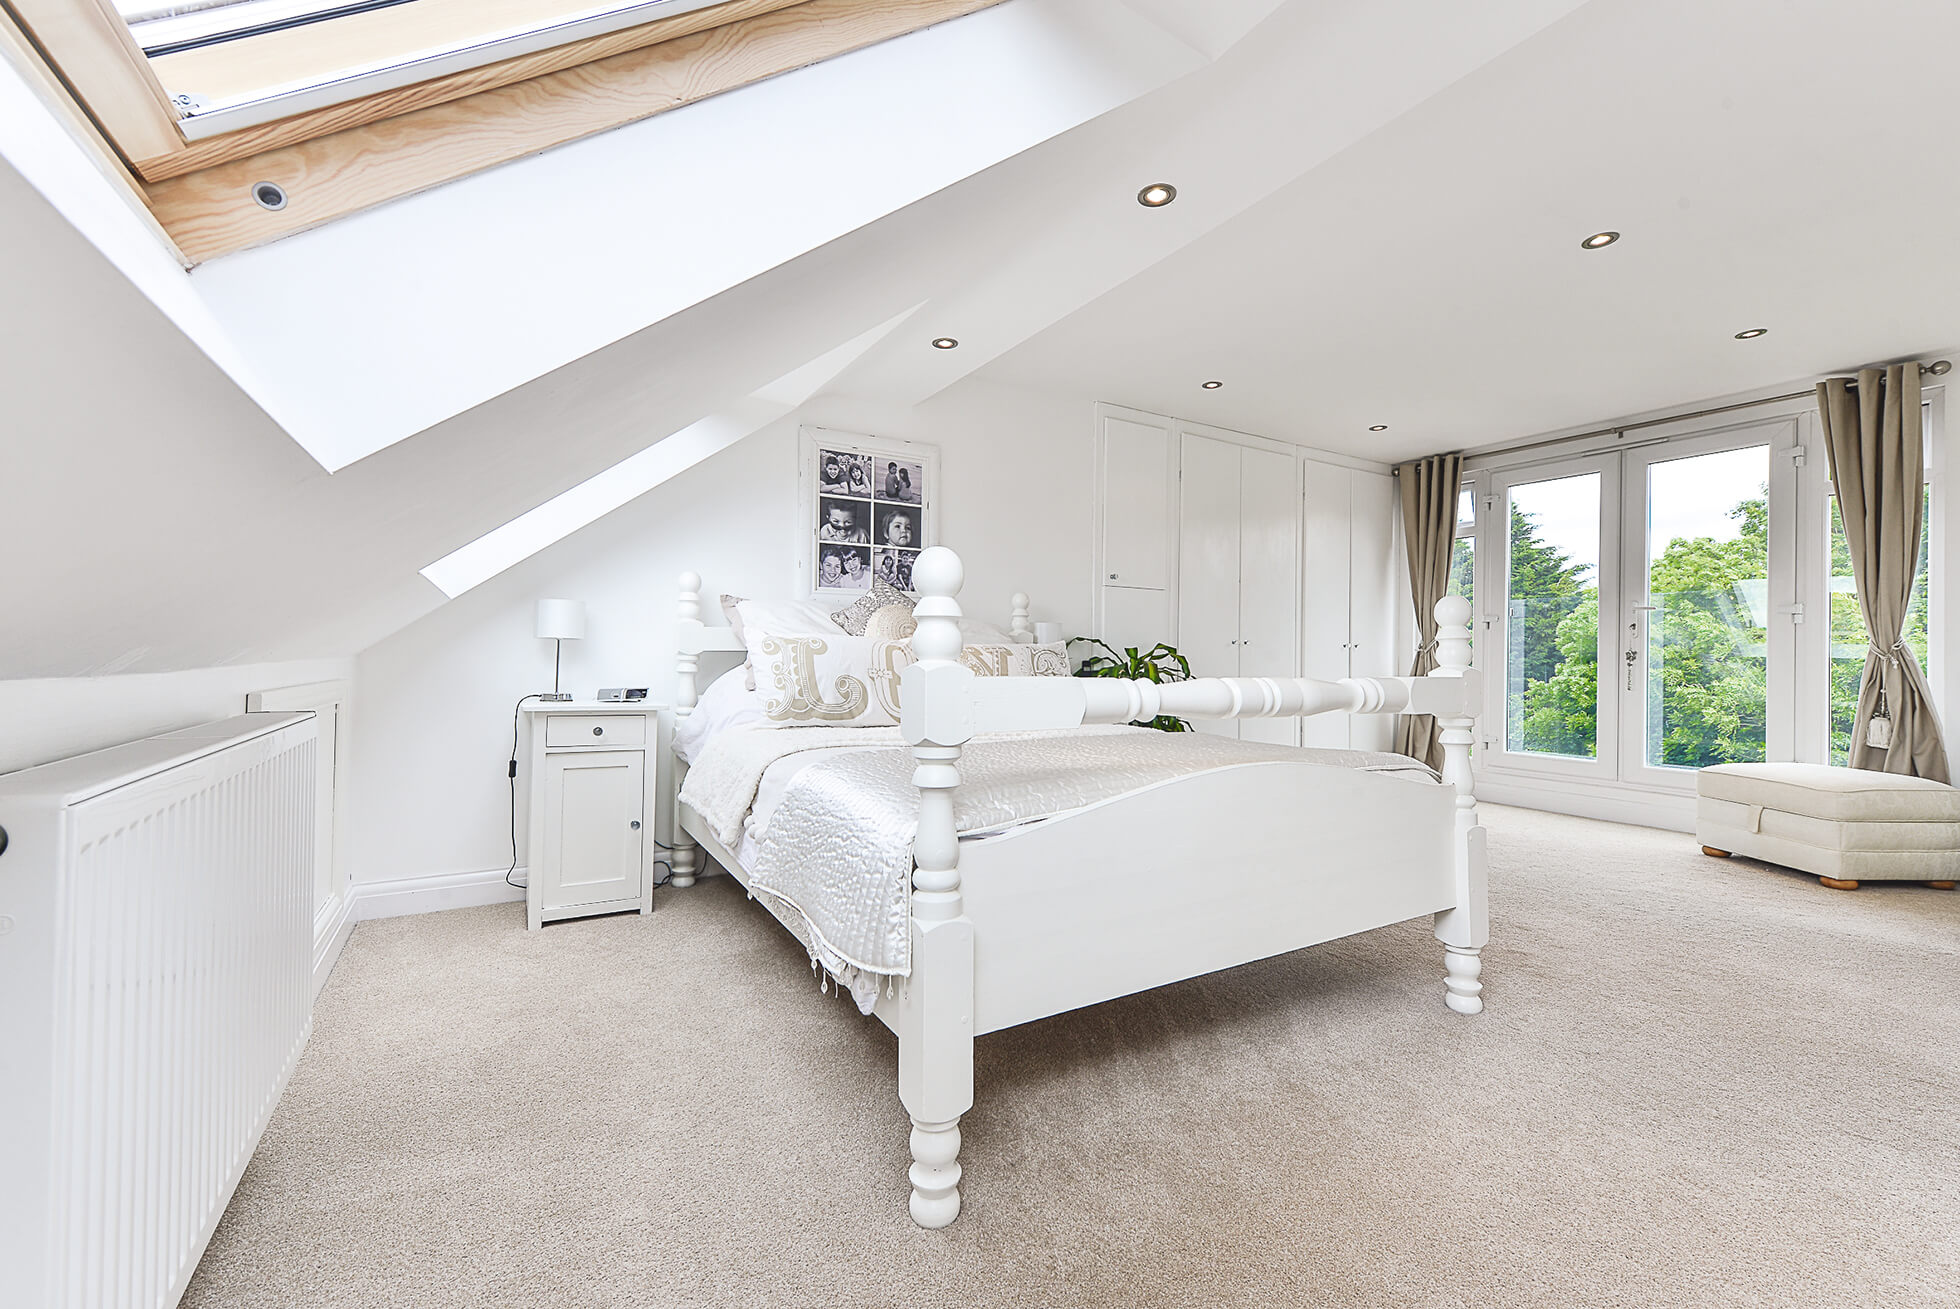 Do you have a question about converting your Loft in Wellpond Green? Here are the most popular questions asked by our clients.